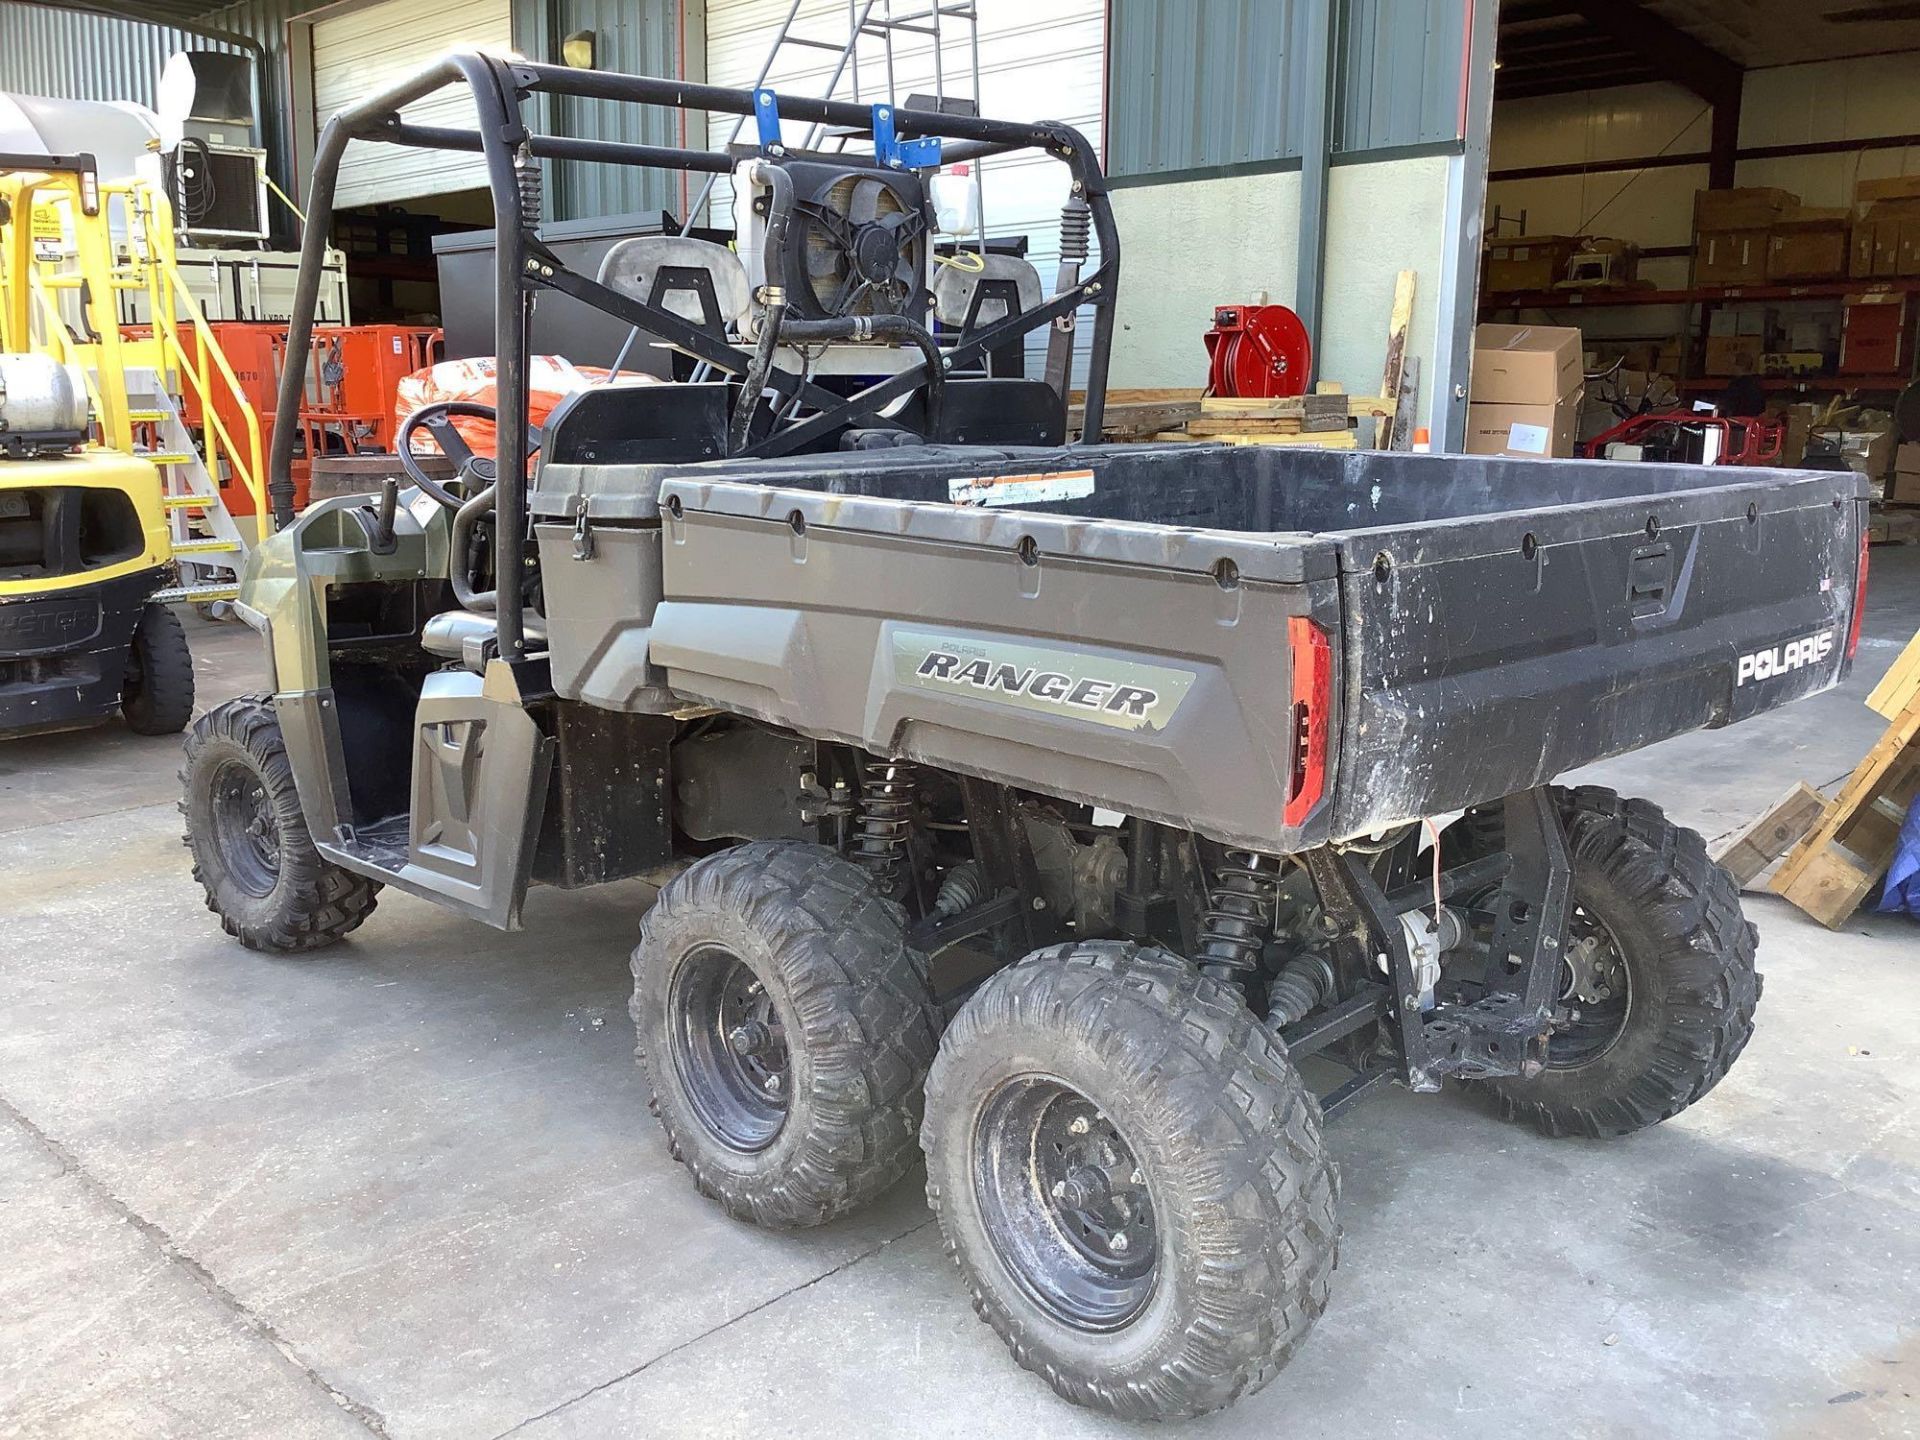 2011 POLARIS 6x6 RANGER 700, GAS POWERED, AWD, AUTOMATIC DUMP BED, STORAGE BOX APPROX 5FT LONG, HITC - Image 8 of 23